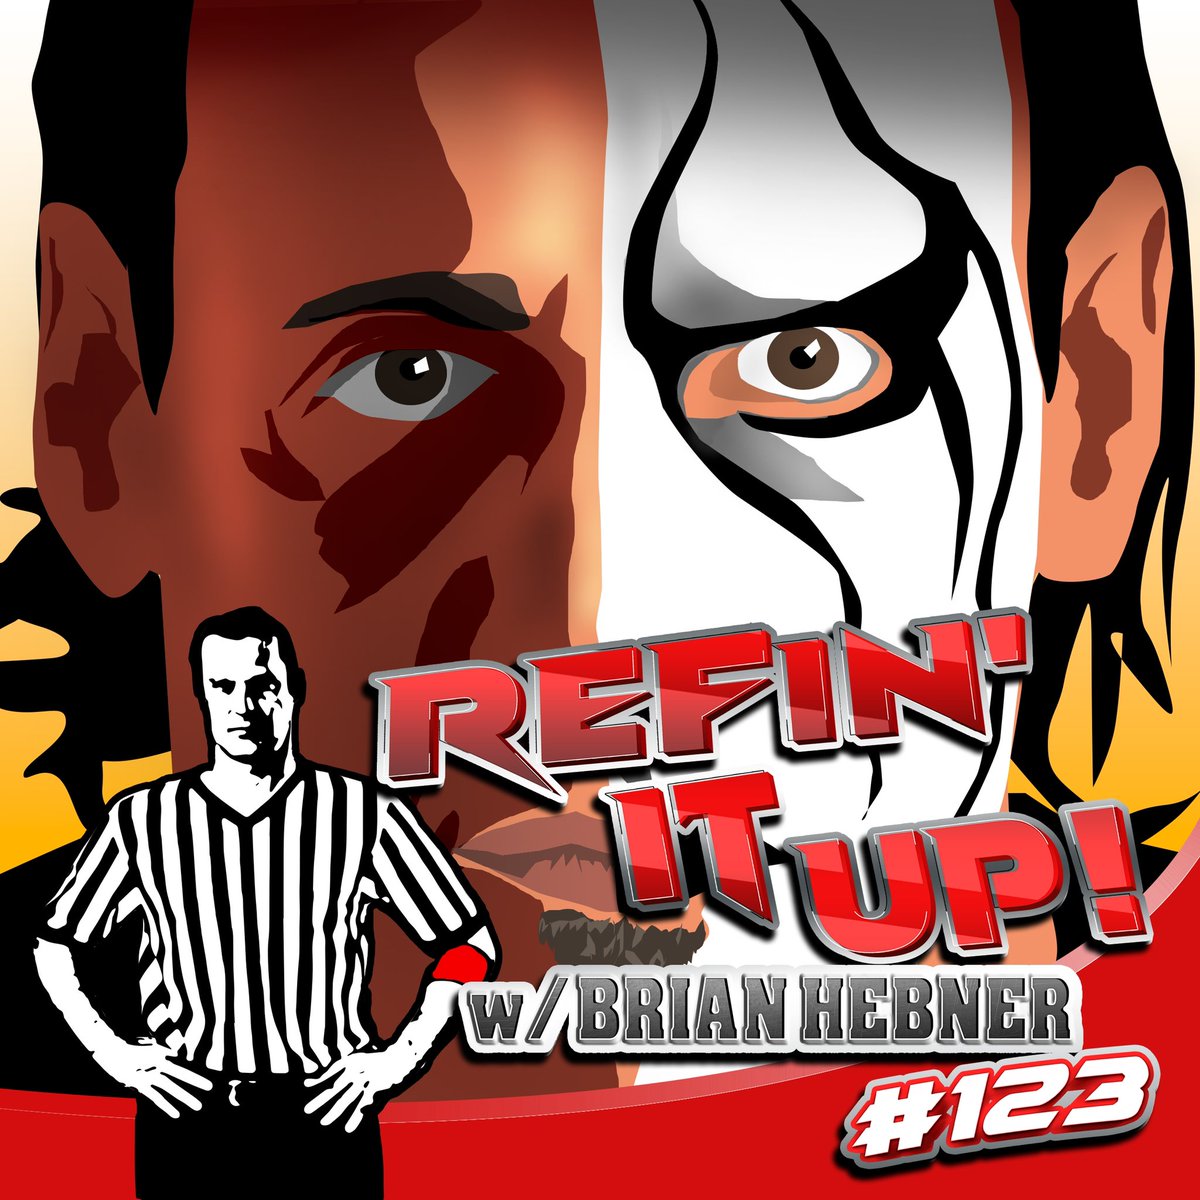 This week it’s all about Sting. Brian speaks on his early career as well as the match he had against Jeff Hardy at Victory Road 2011 and the debacle that it was. 

@babyhebner 
@RealRaymondJay 

https://t.co/JBD7TYFQXp

#123 #RantersNation 

Artwork by @JDHoop702 https://t.co/KDKrsufXGD